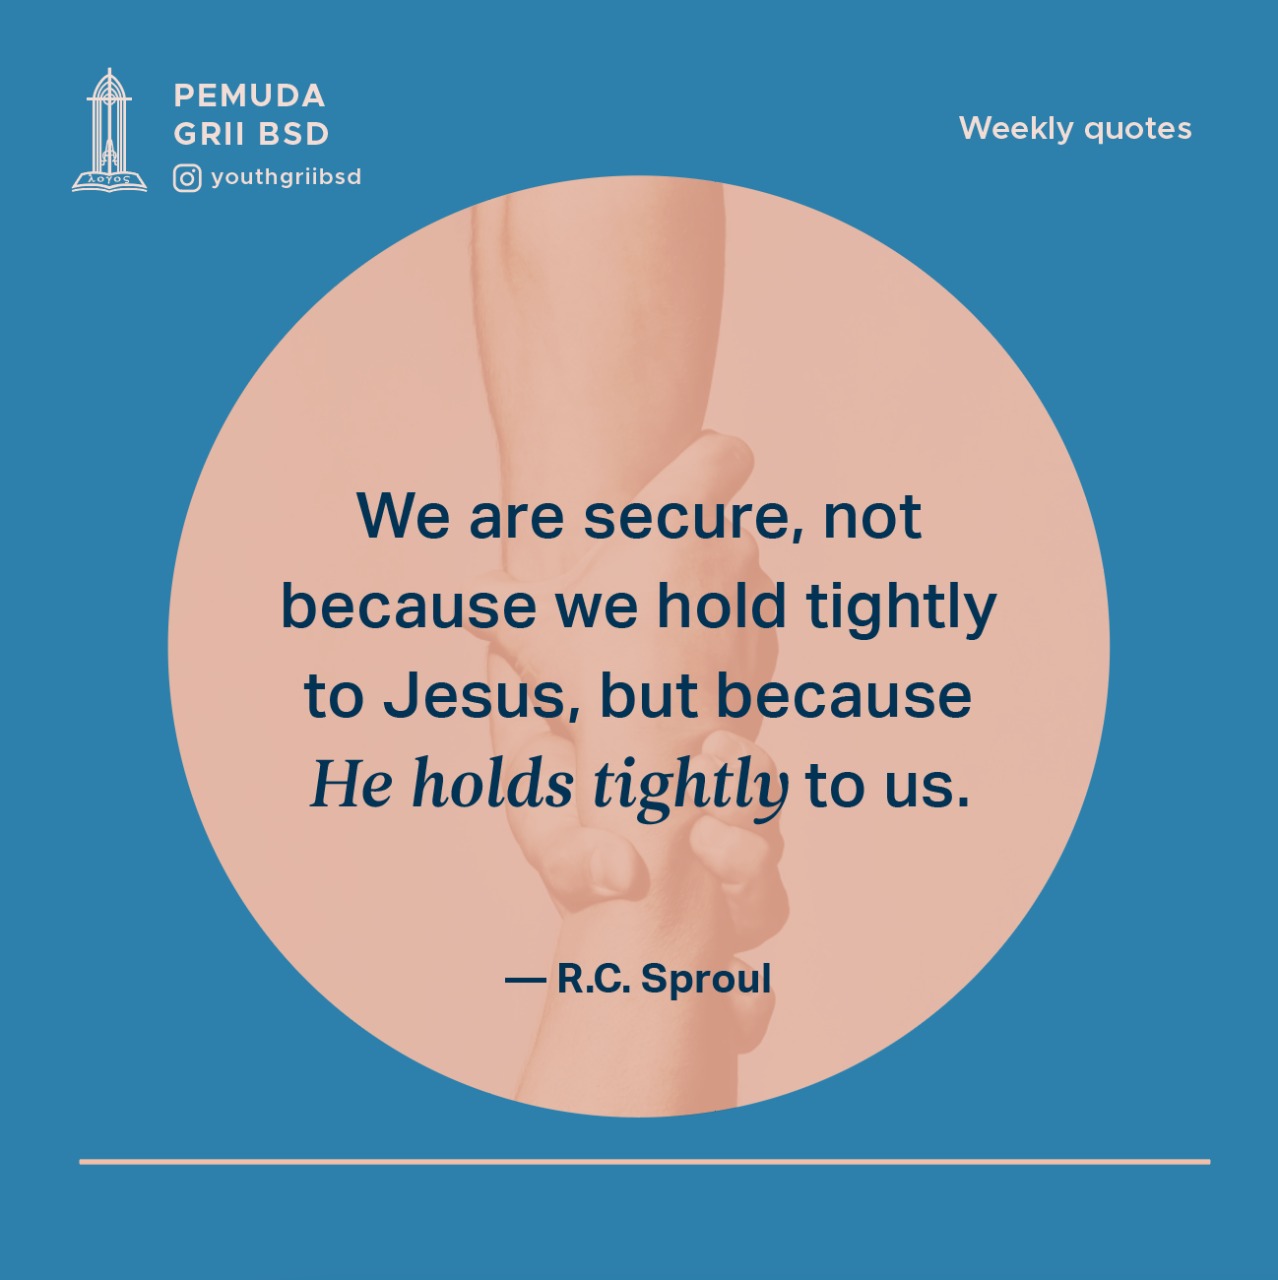 We are secure, not because we hold tightly to Jesus, but because He holds tightly to us.